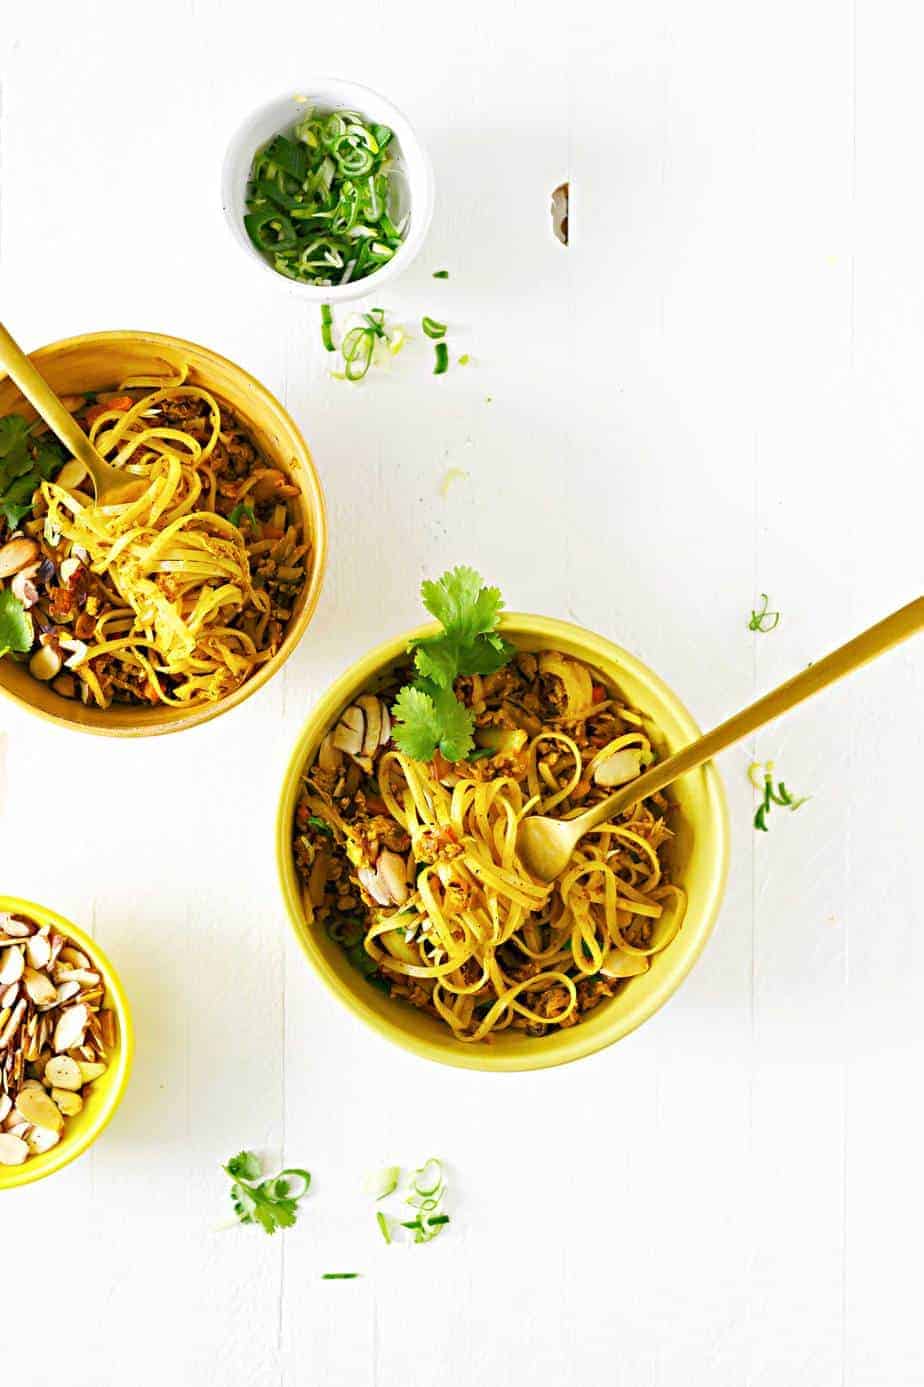 Pan-Fried Curry Noodles (or Curried Pad Thai) Recipe (via thepigandquill.com) #glutenfree #vegetarian #plantbased 